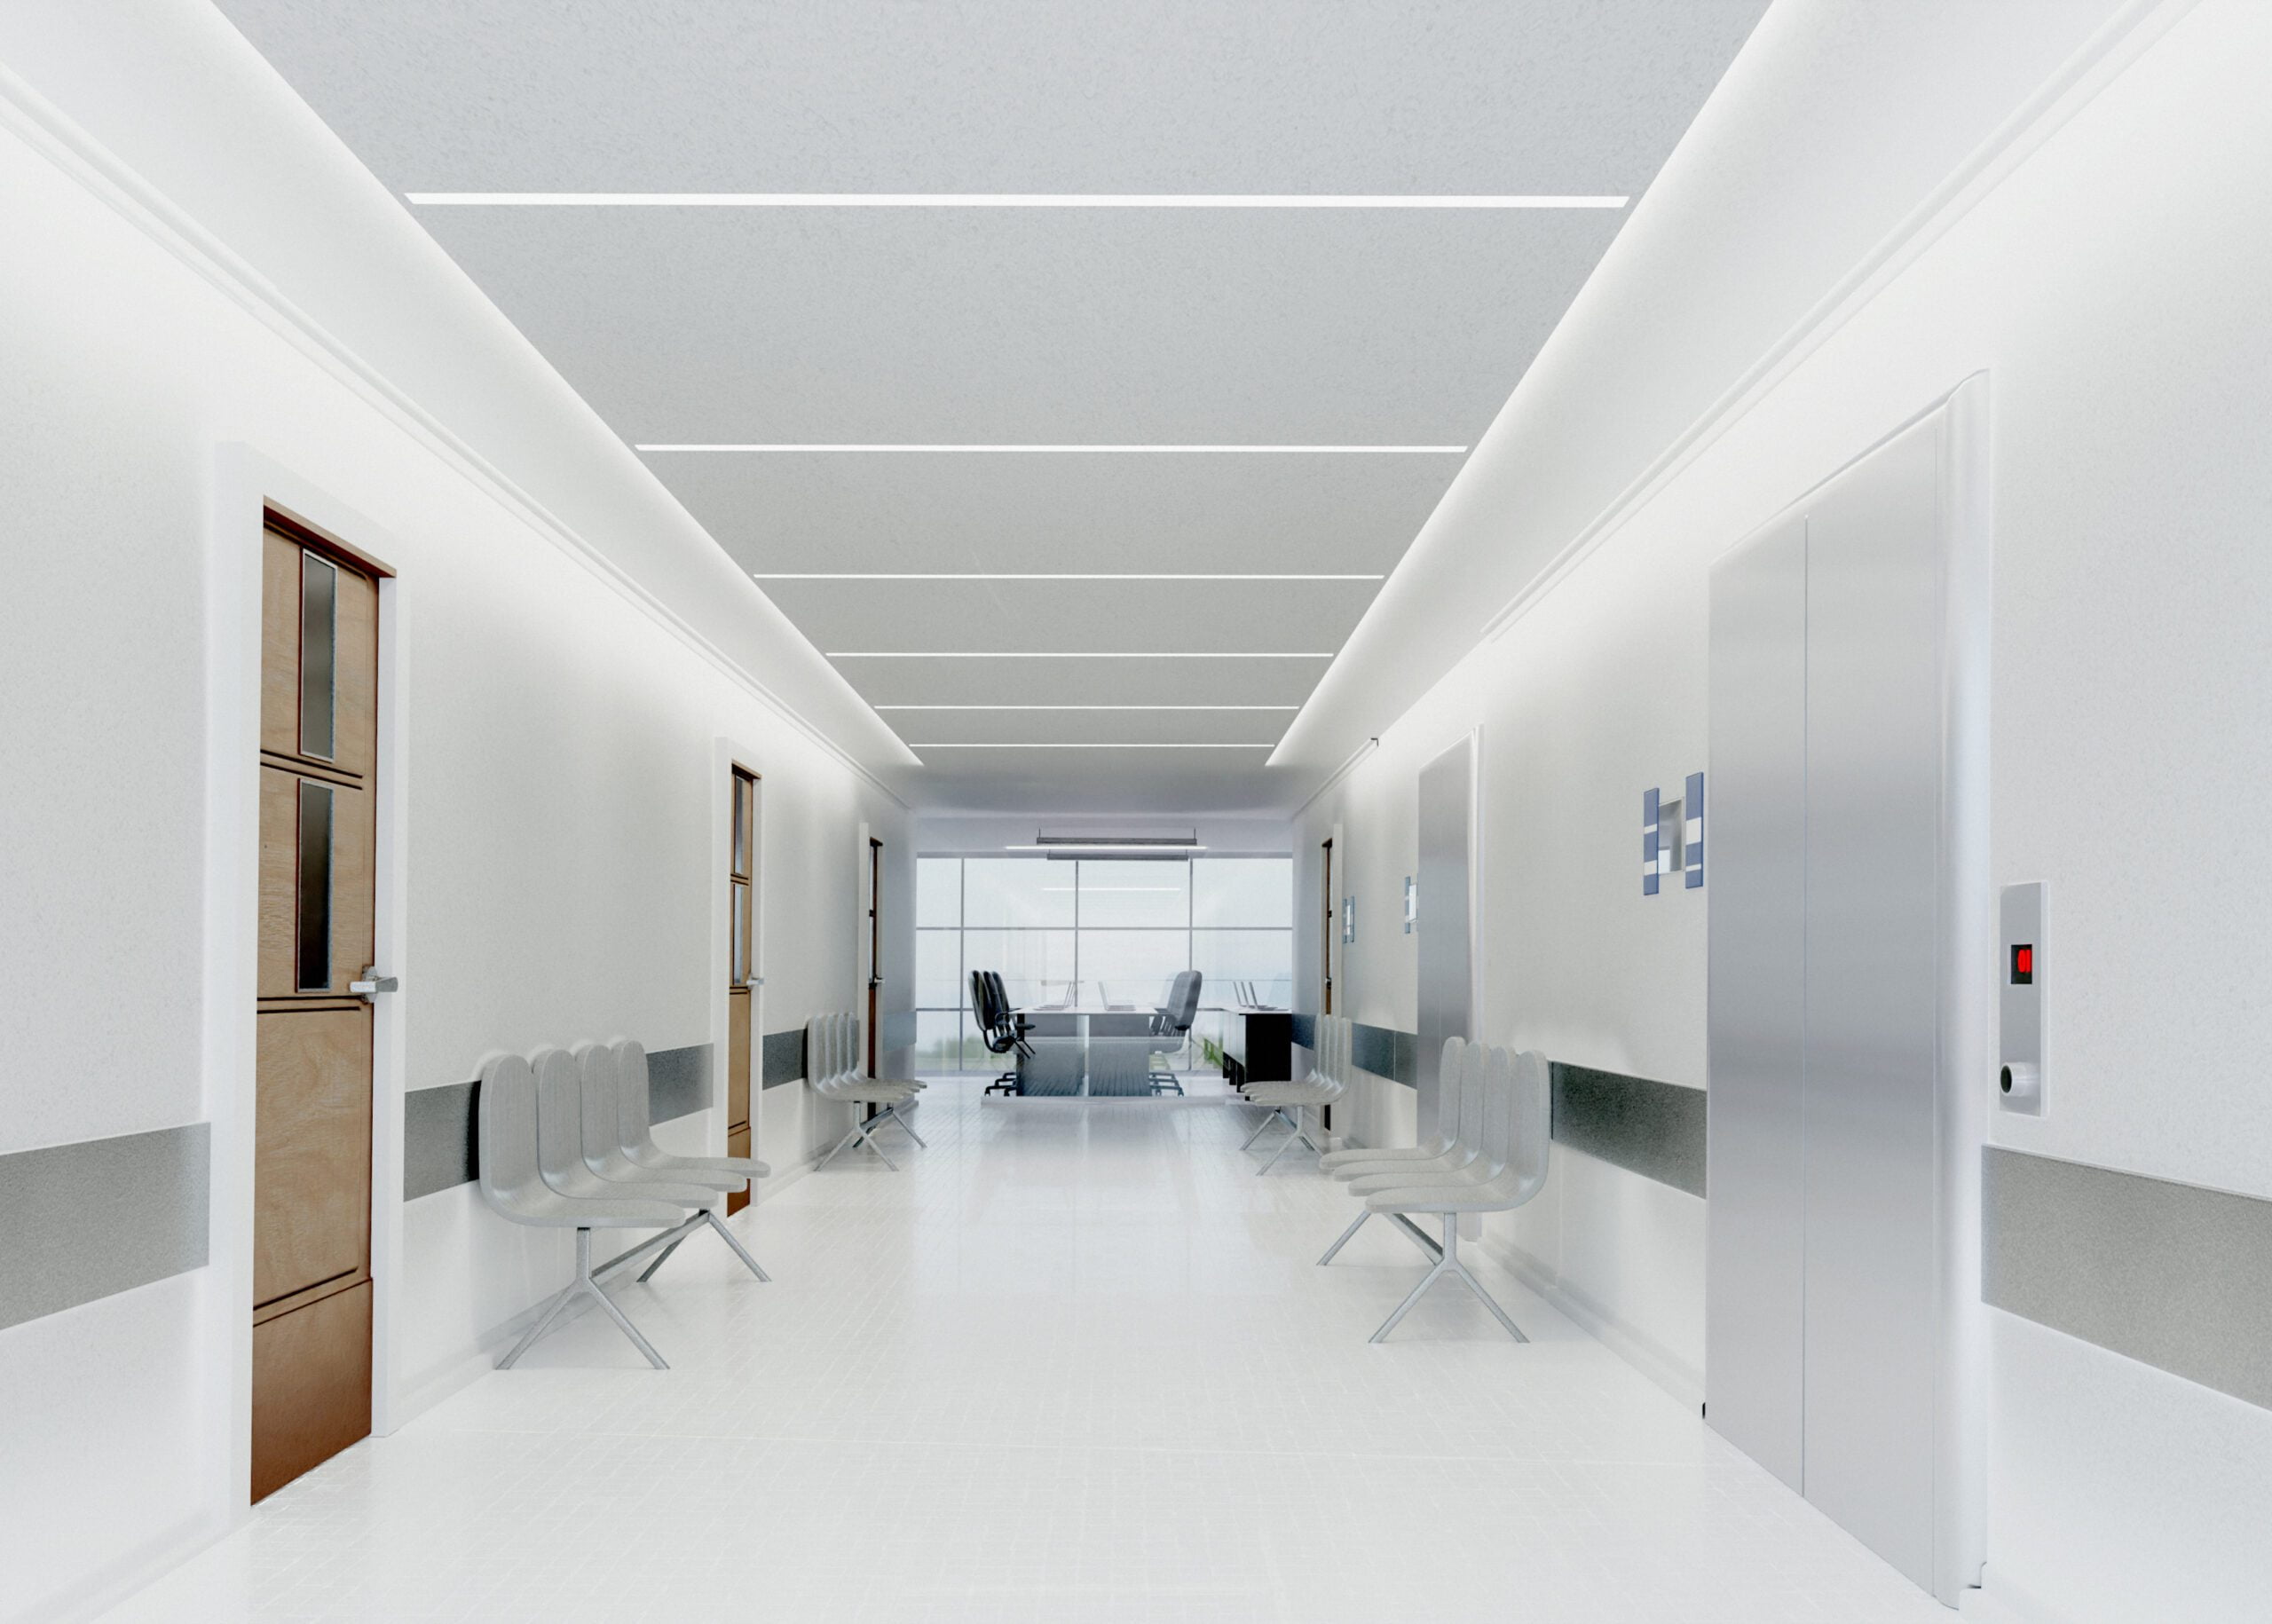 Suspended Ceilings for Hallway